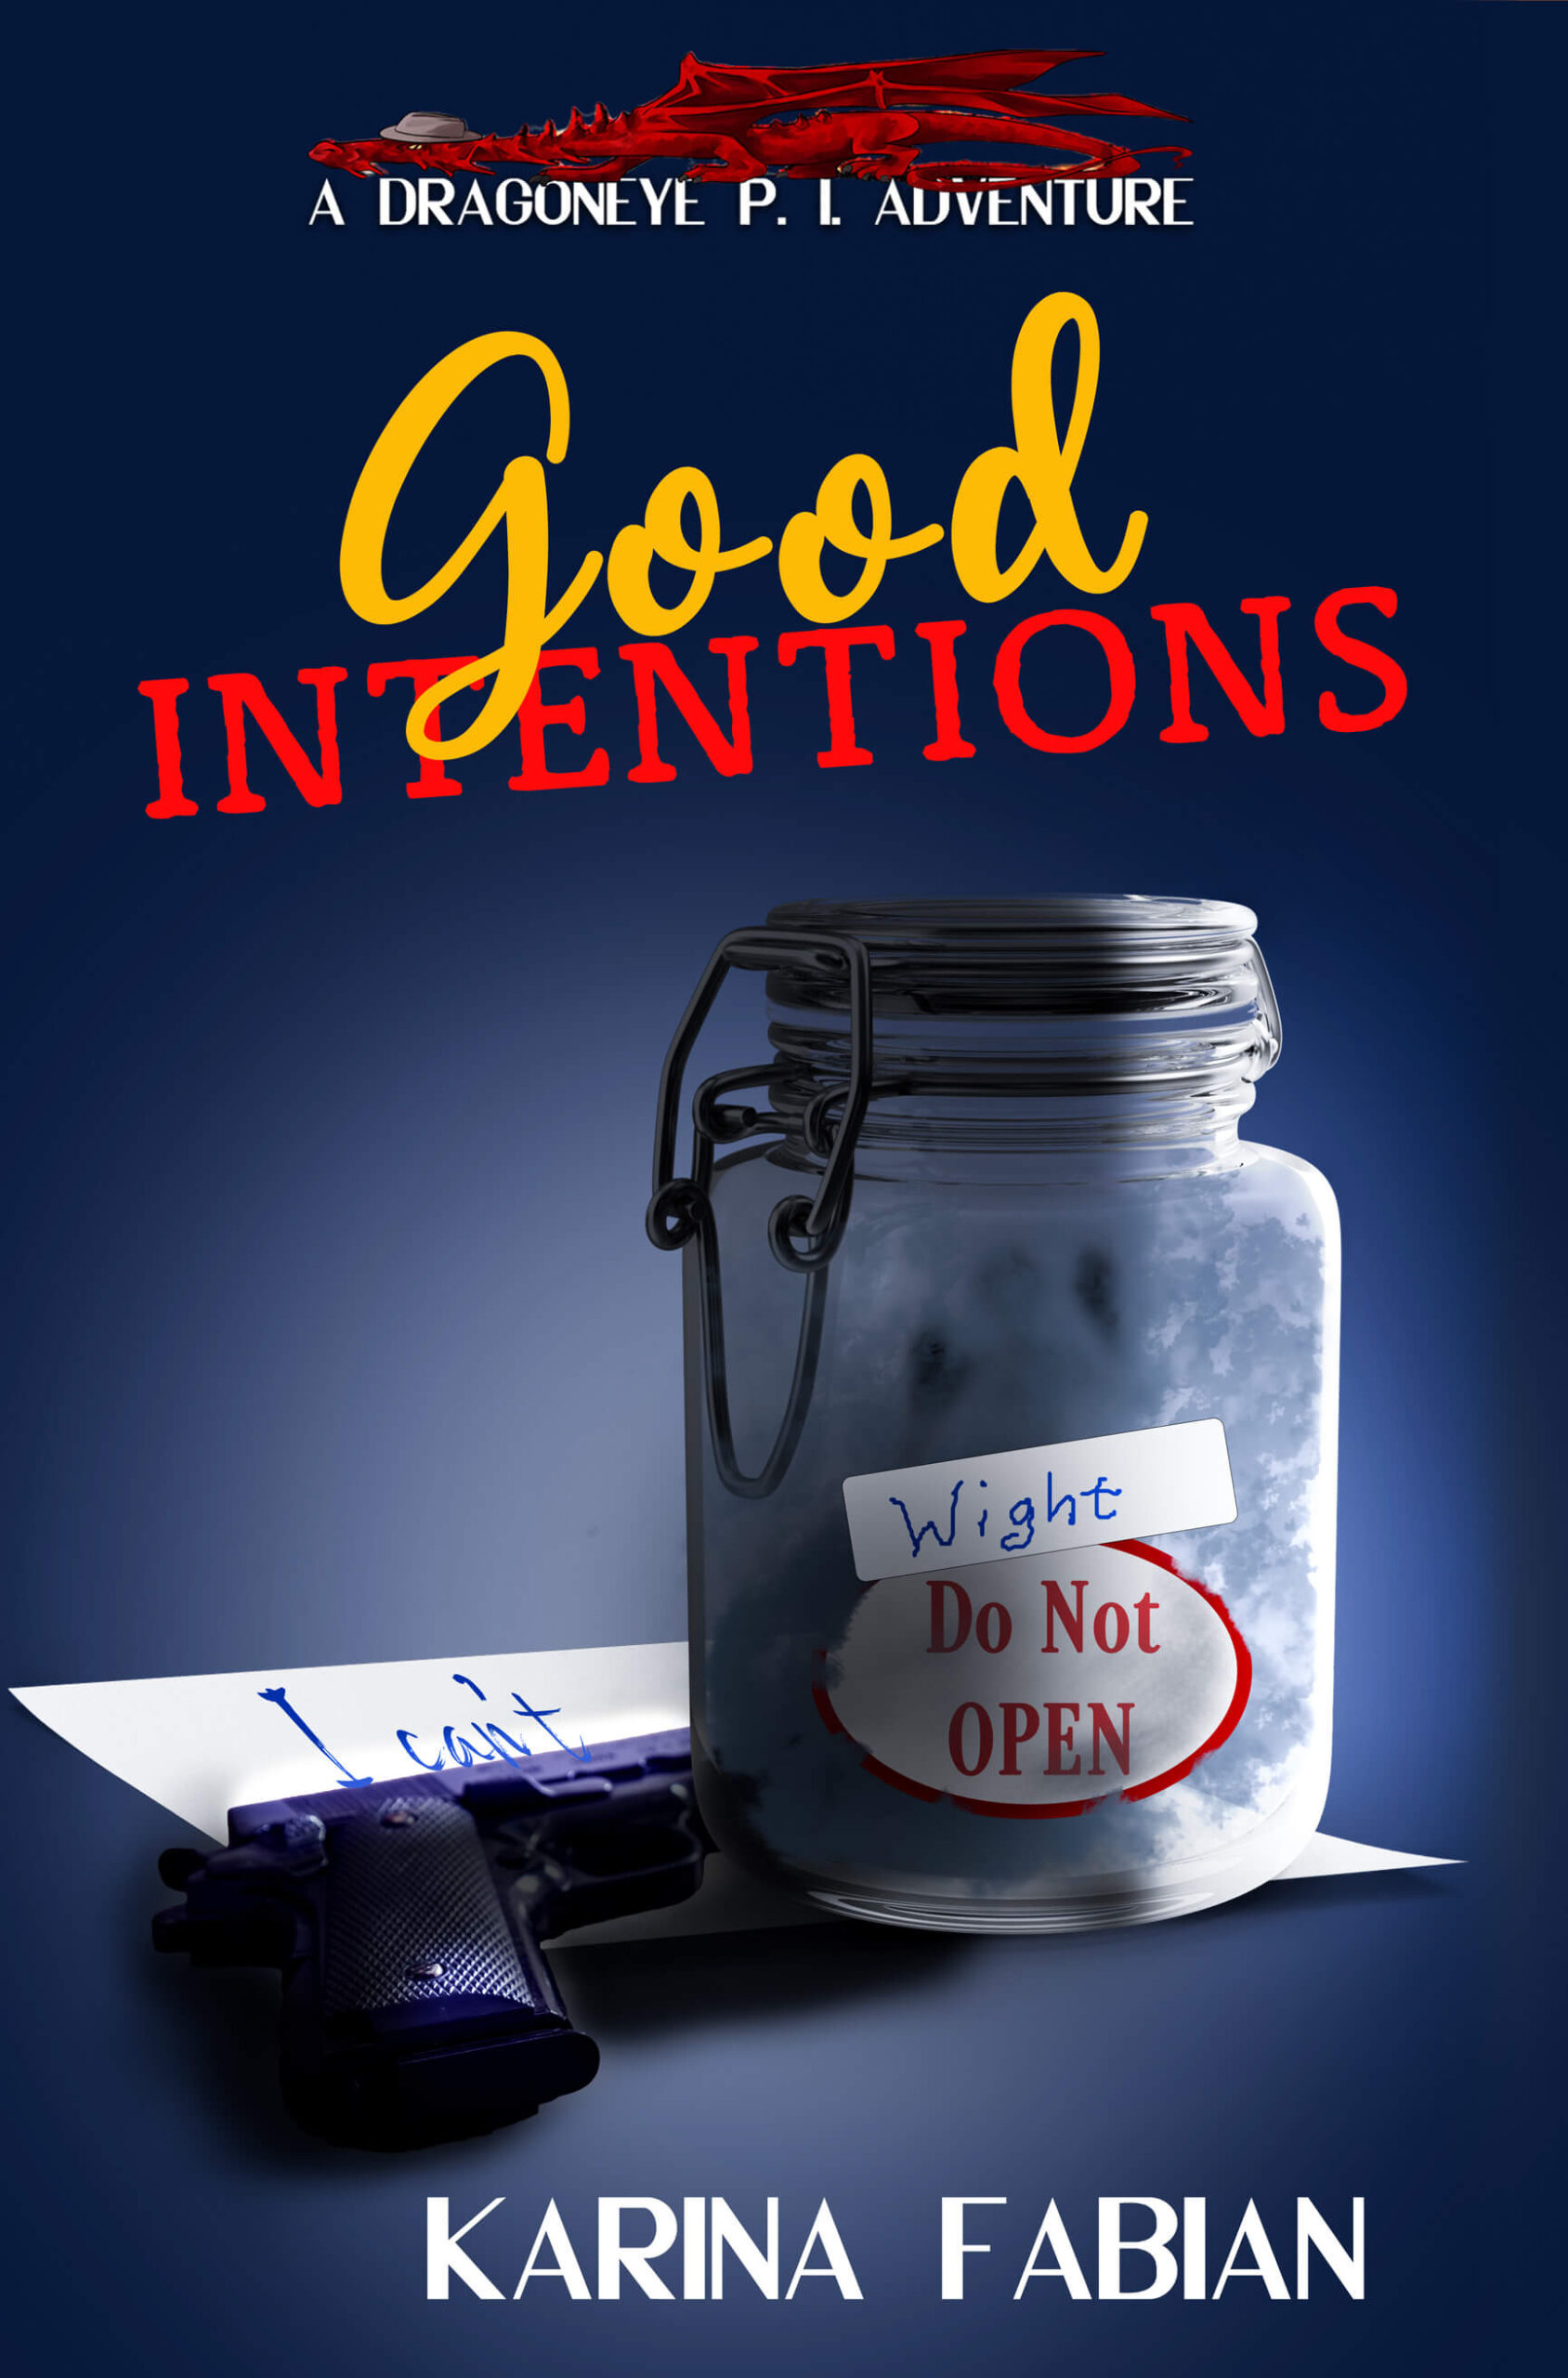 Cover art for Good Intnetions, Book 7 in the DragonEye series by Karina Fabian